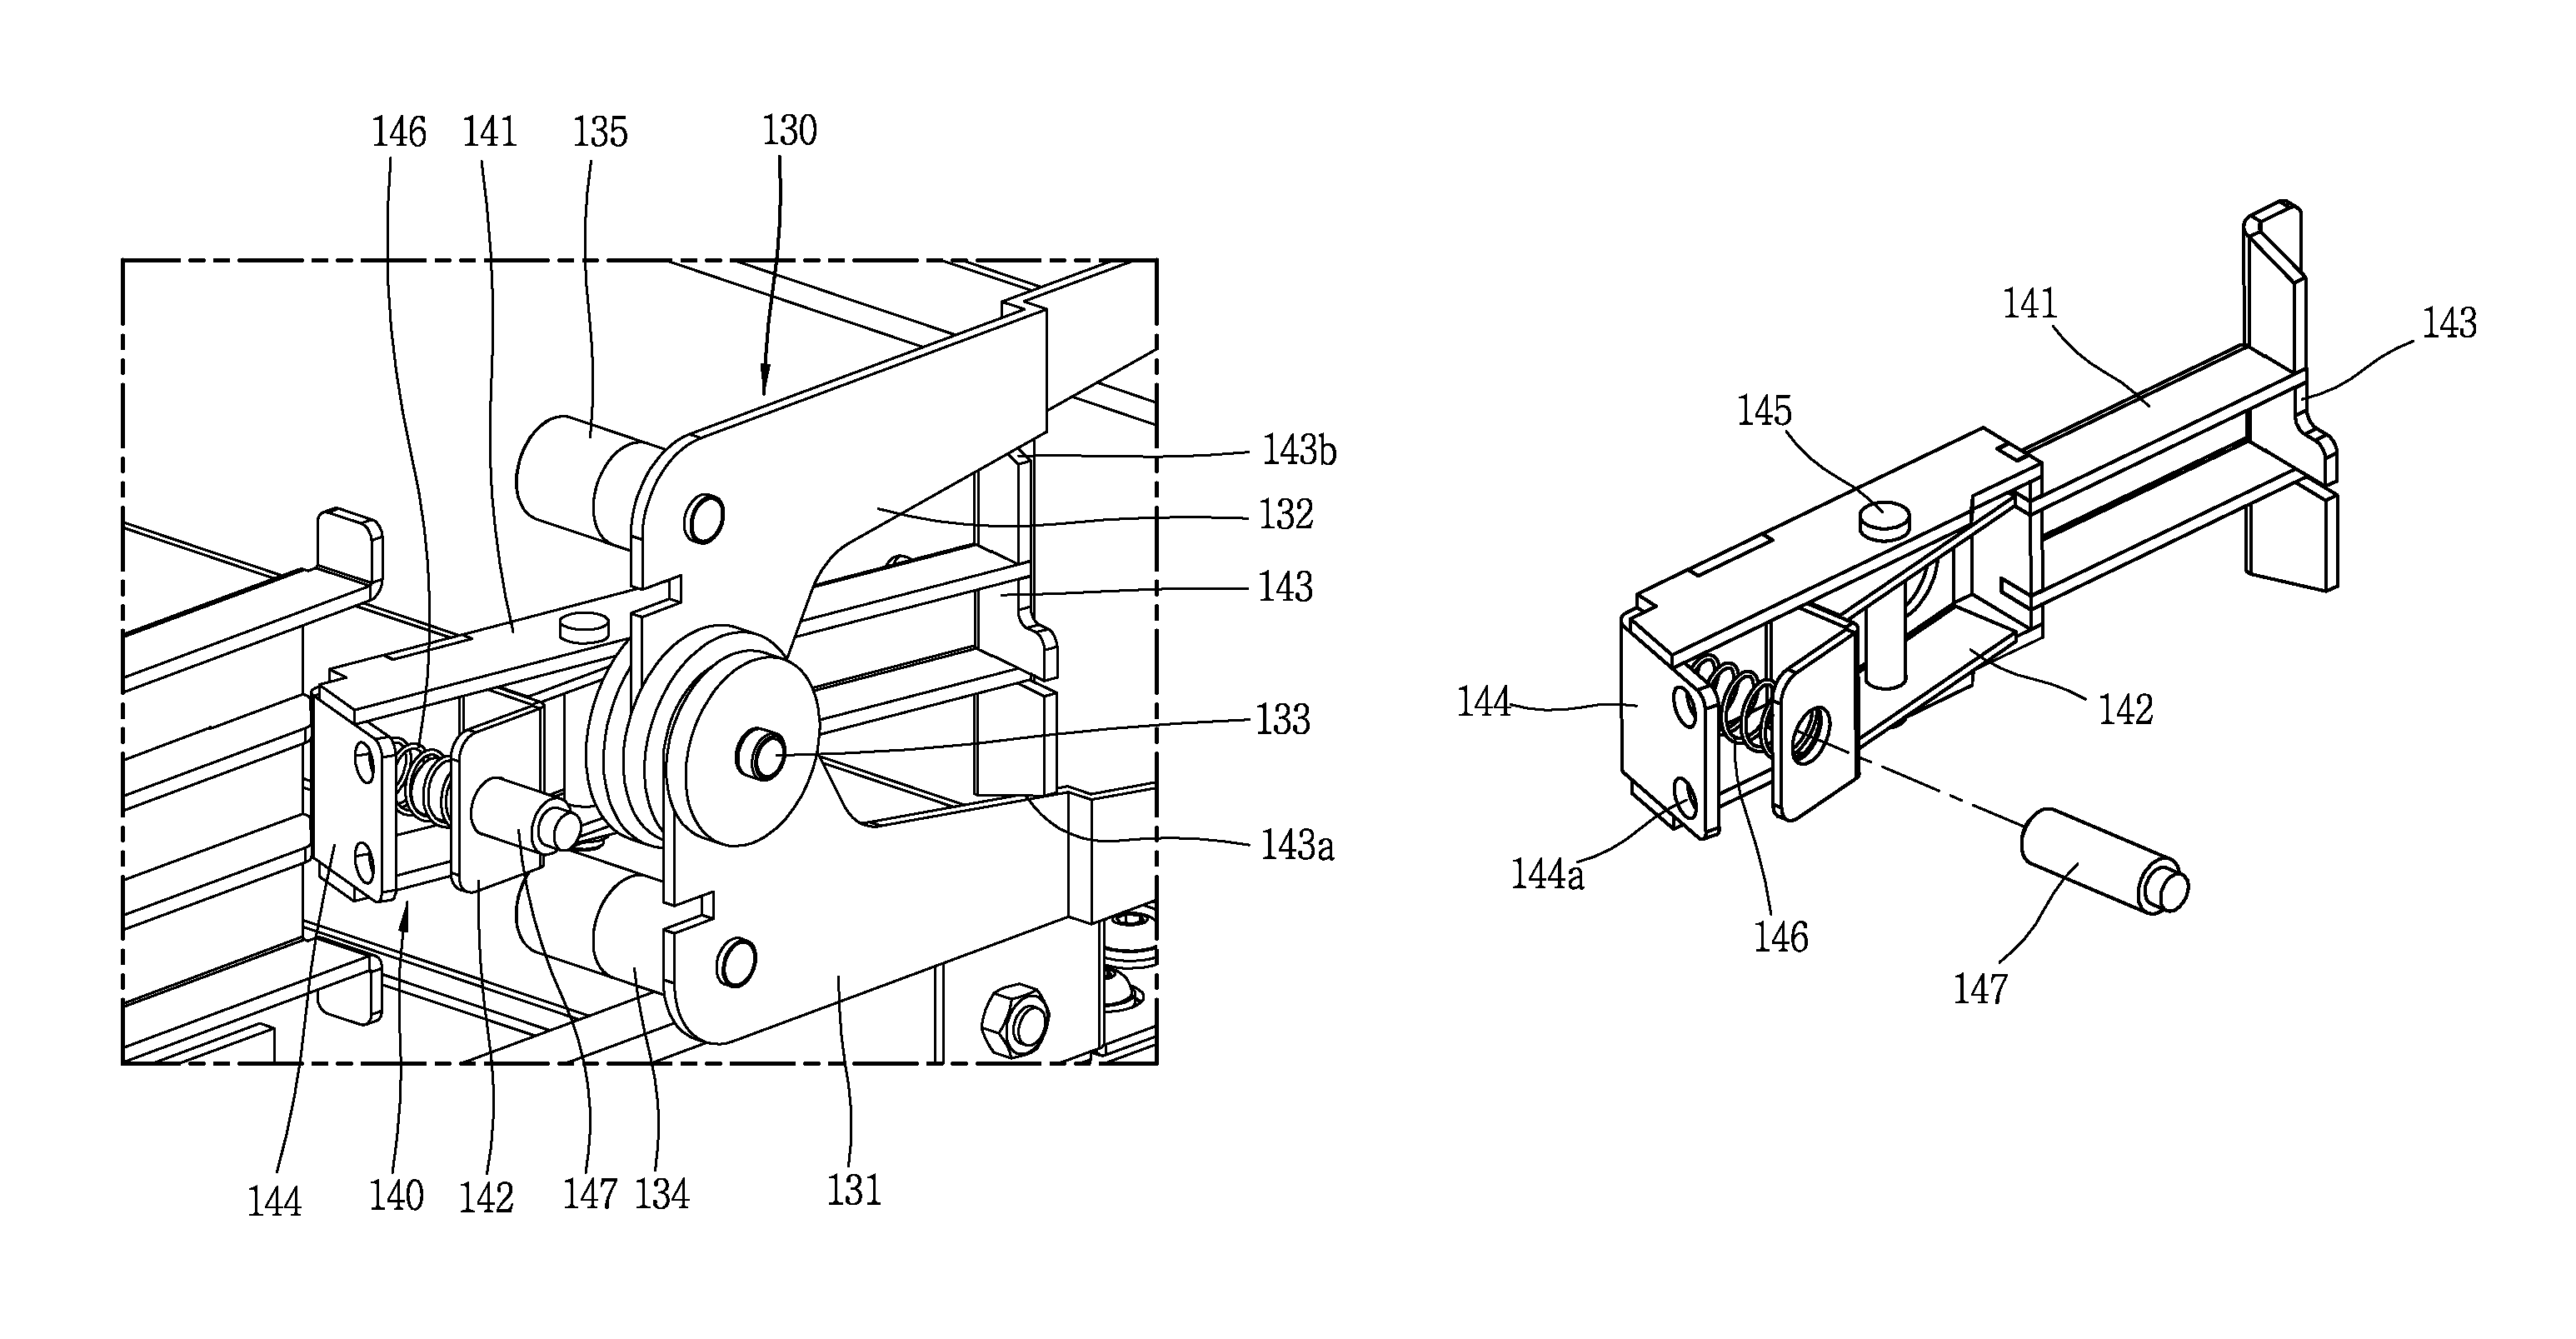 Circuit breaker having cradle with a shutter safety device